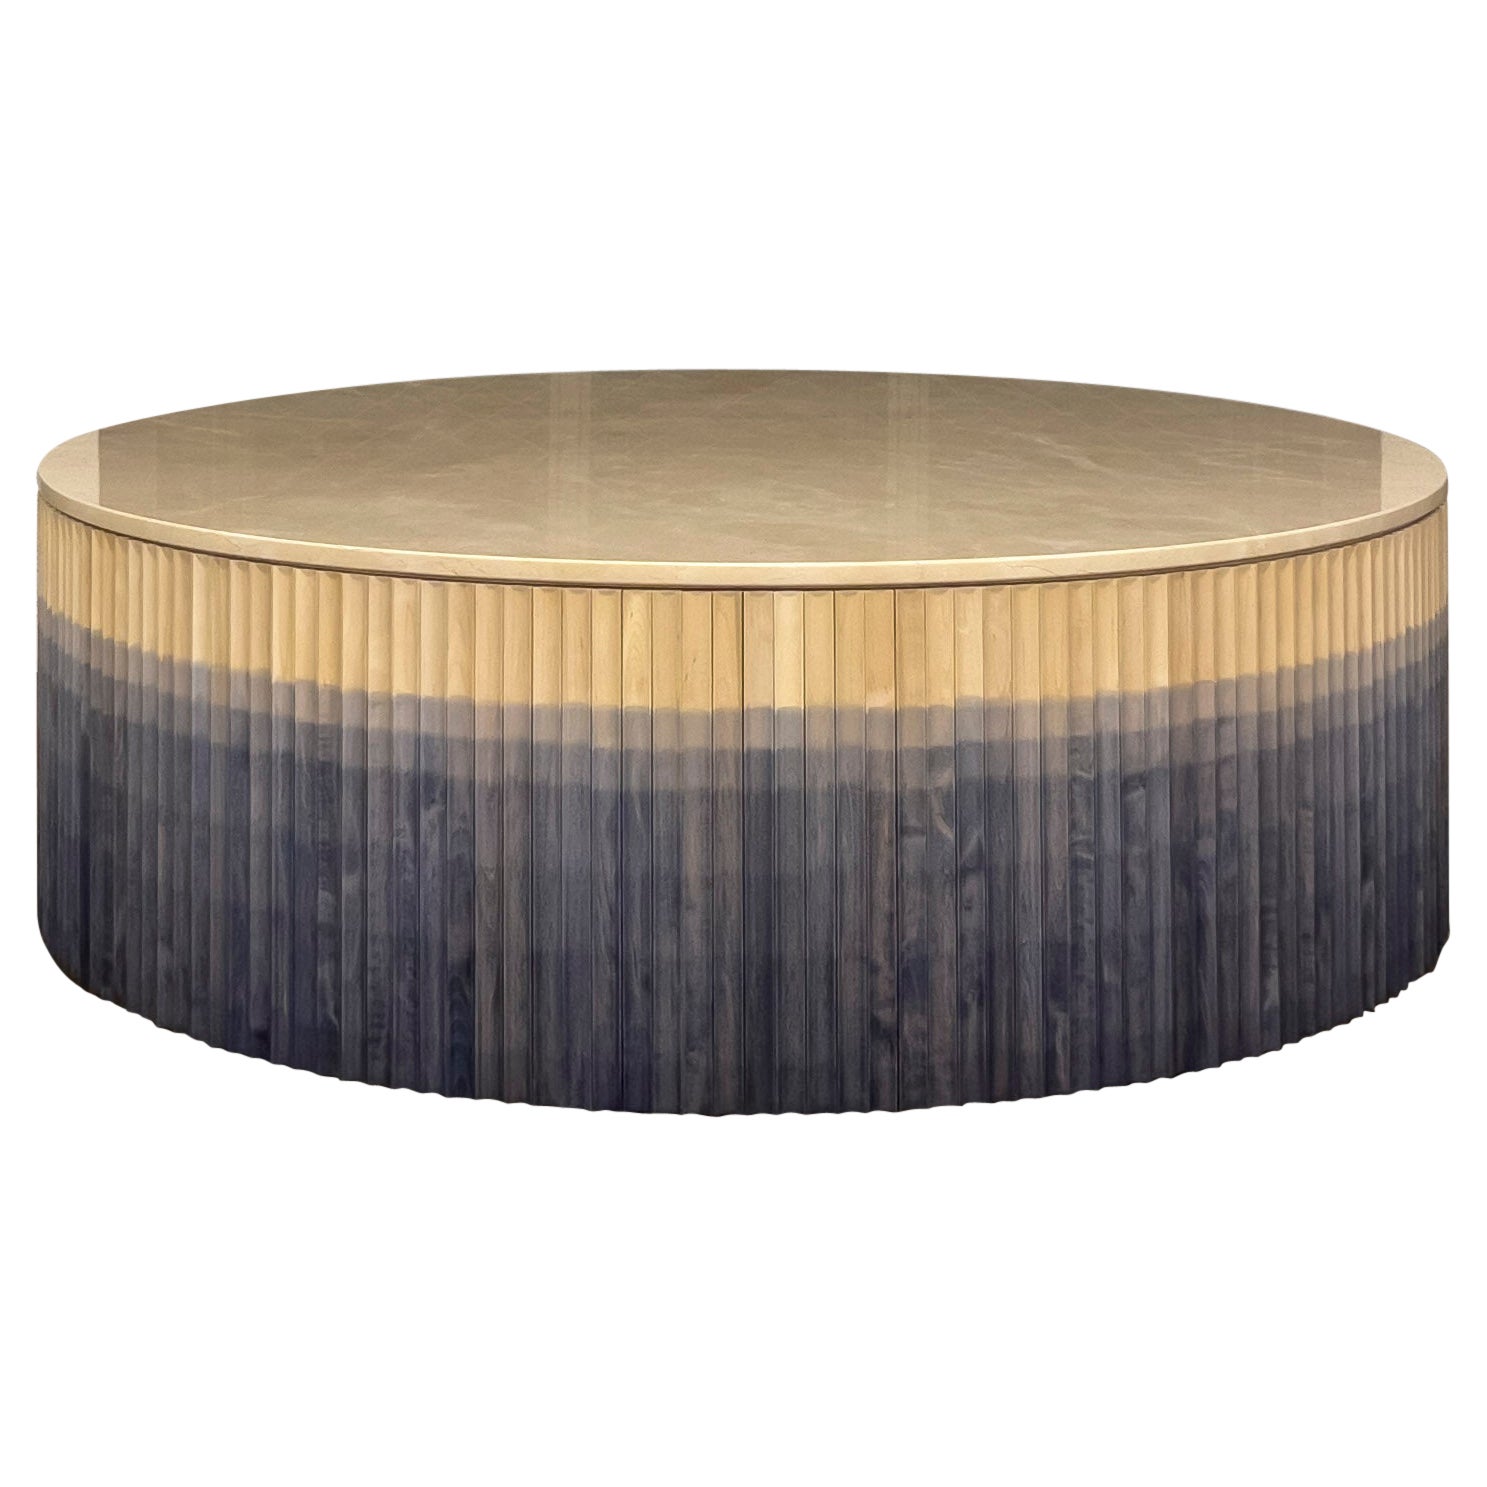 Pilar Round Coffee Table Large/ Blue Ombré Maple Wood, Crema Marble Top by INDO-